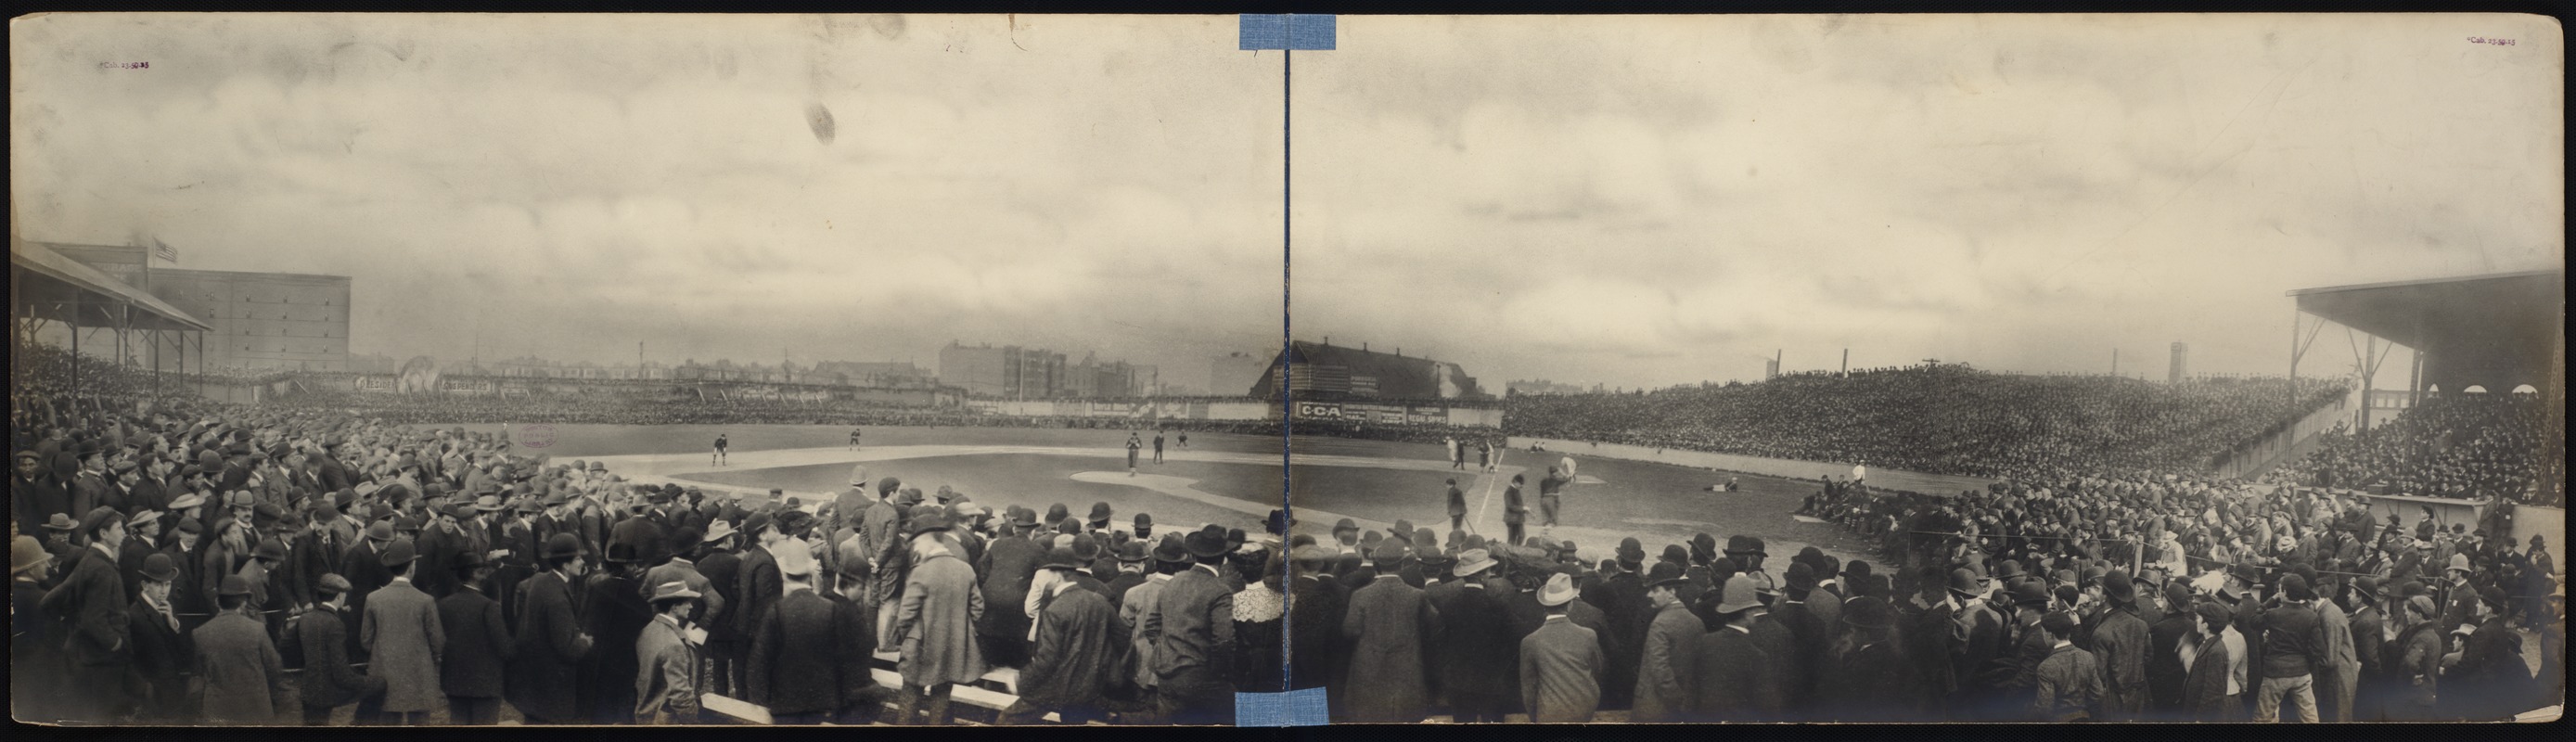 Fans on the field at the Huntington Avenue Grounds, 1903 World